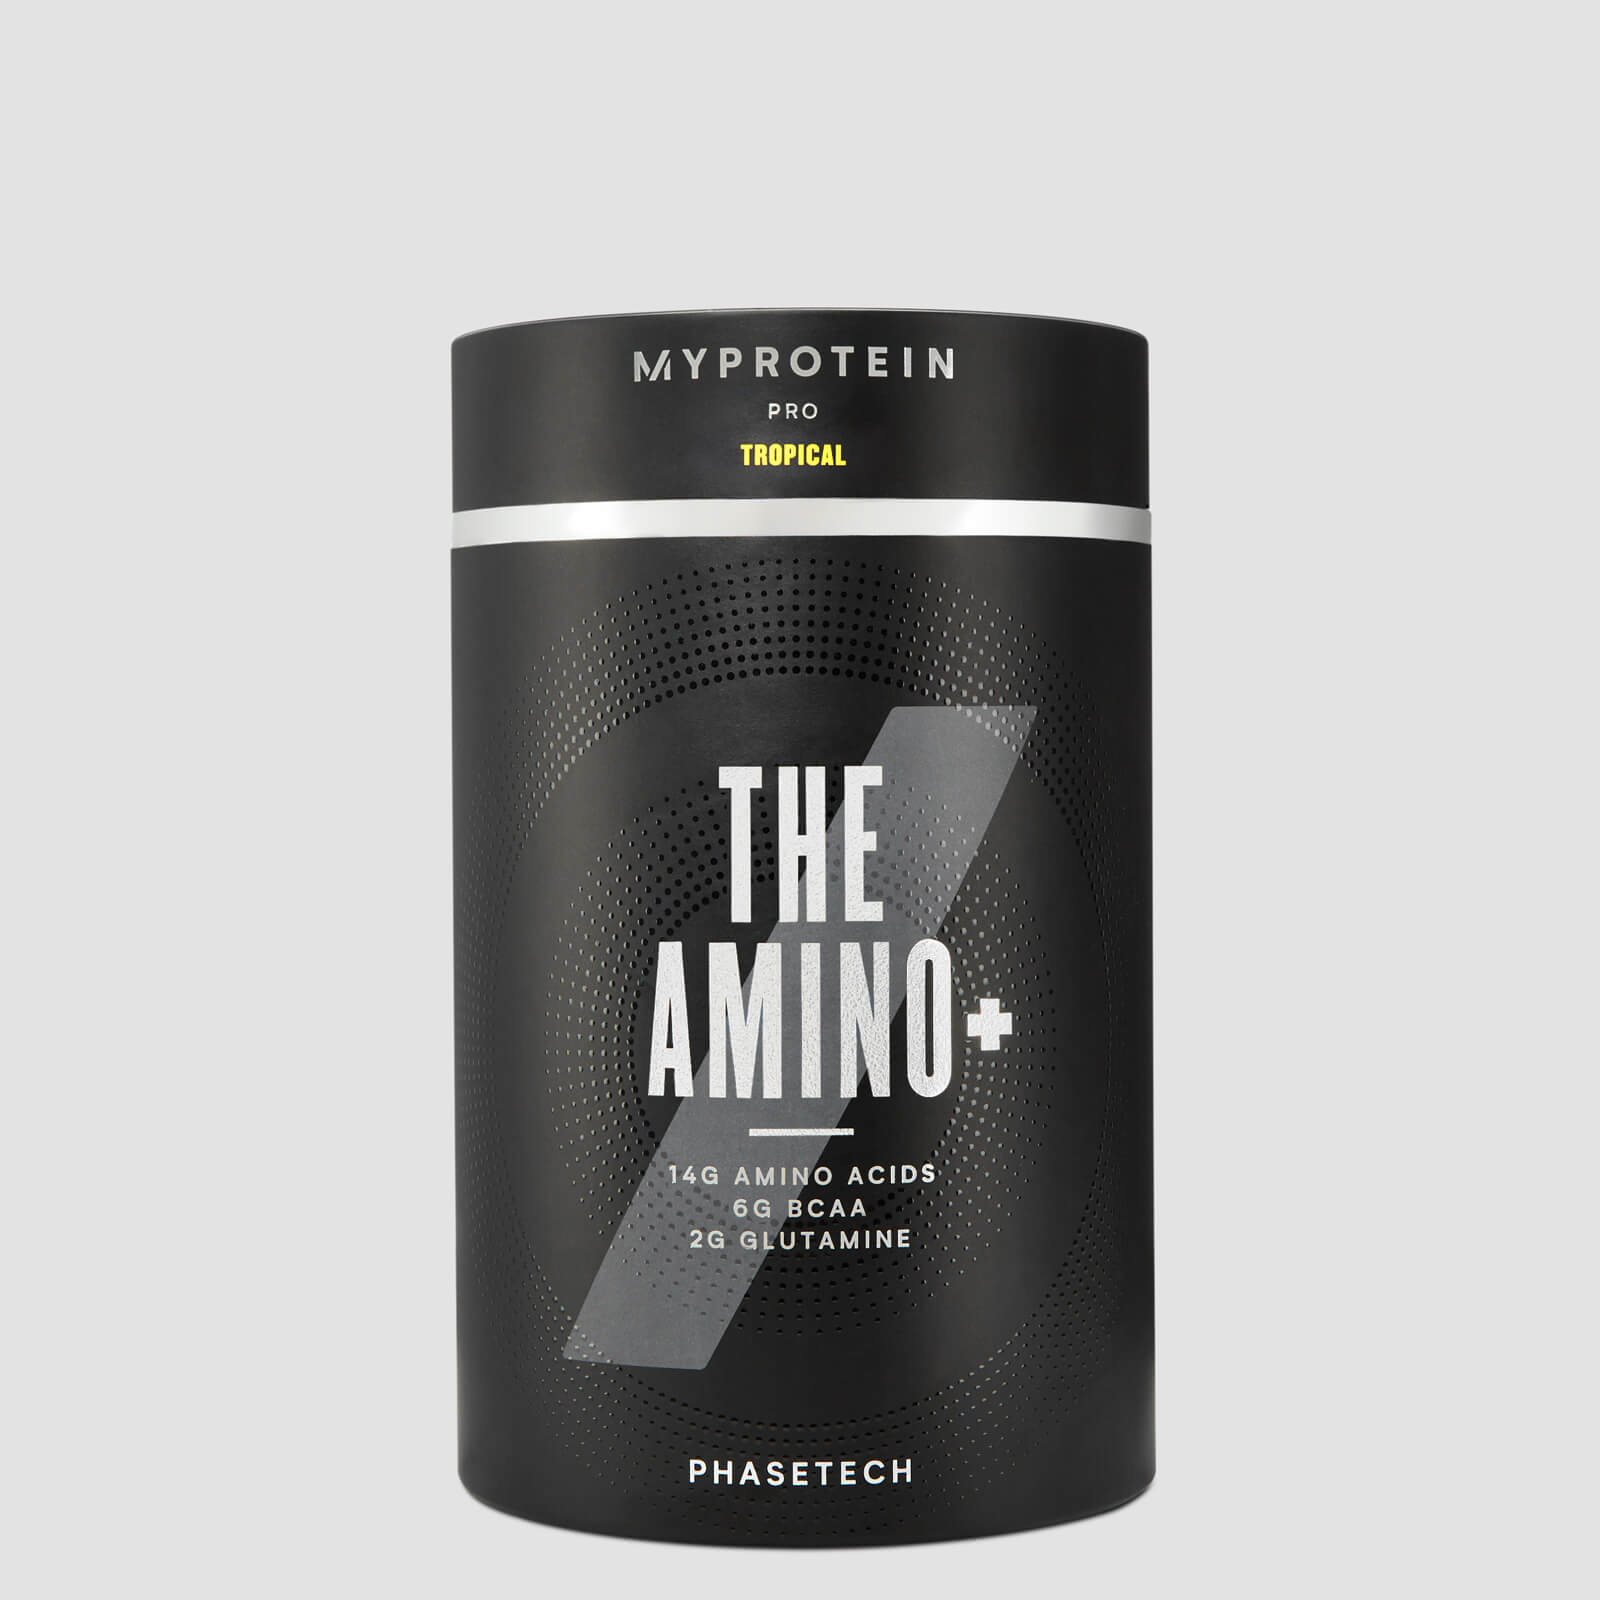 Myprotein THE Amino+ - 20servings - Tropical